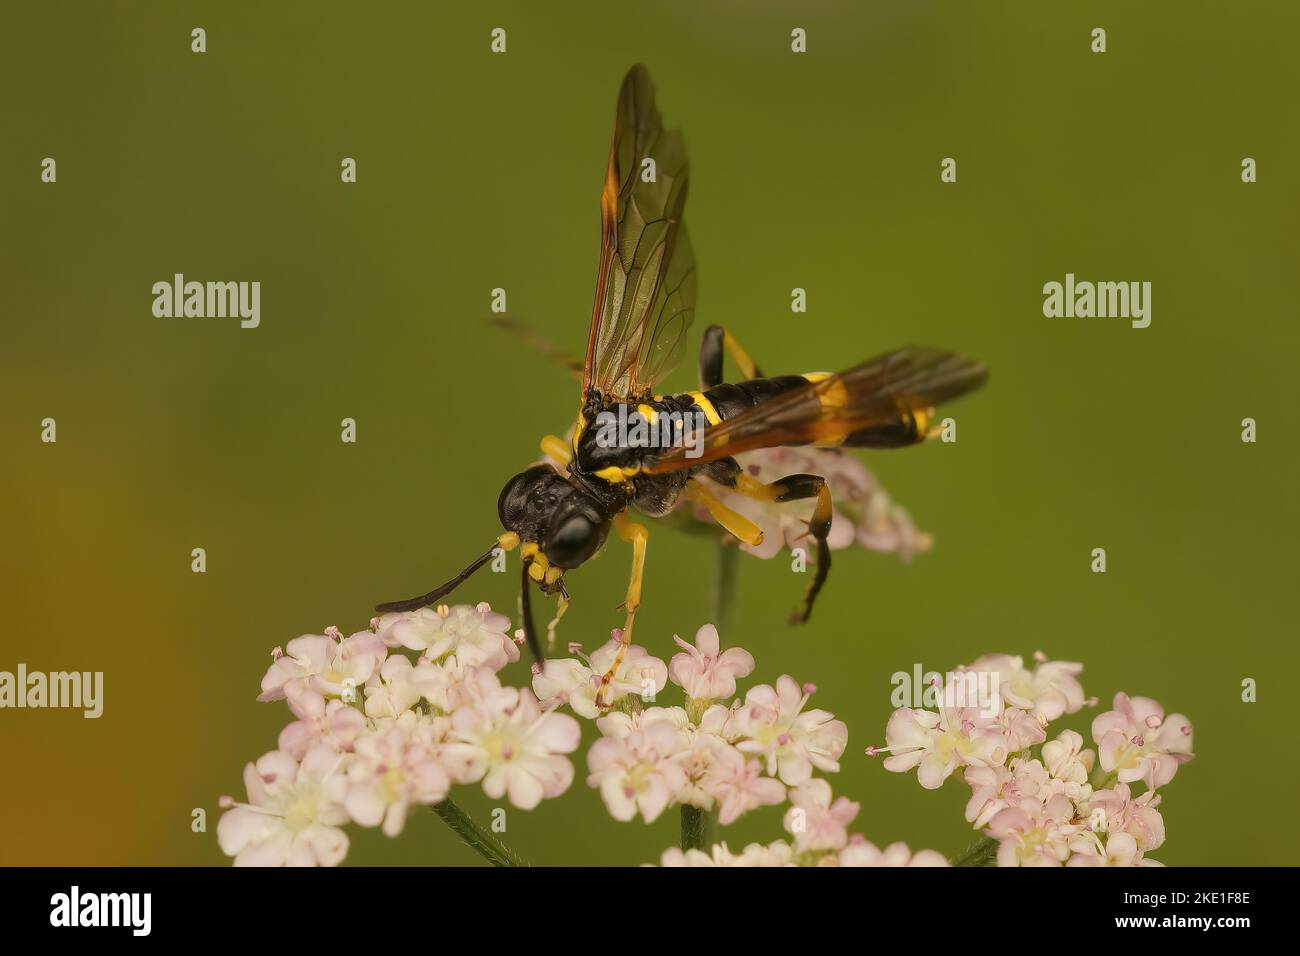 A closeup of a sawfly pollinating beautiful small flowers Stock Photo